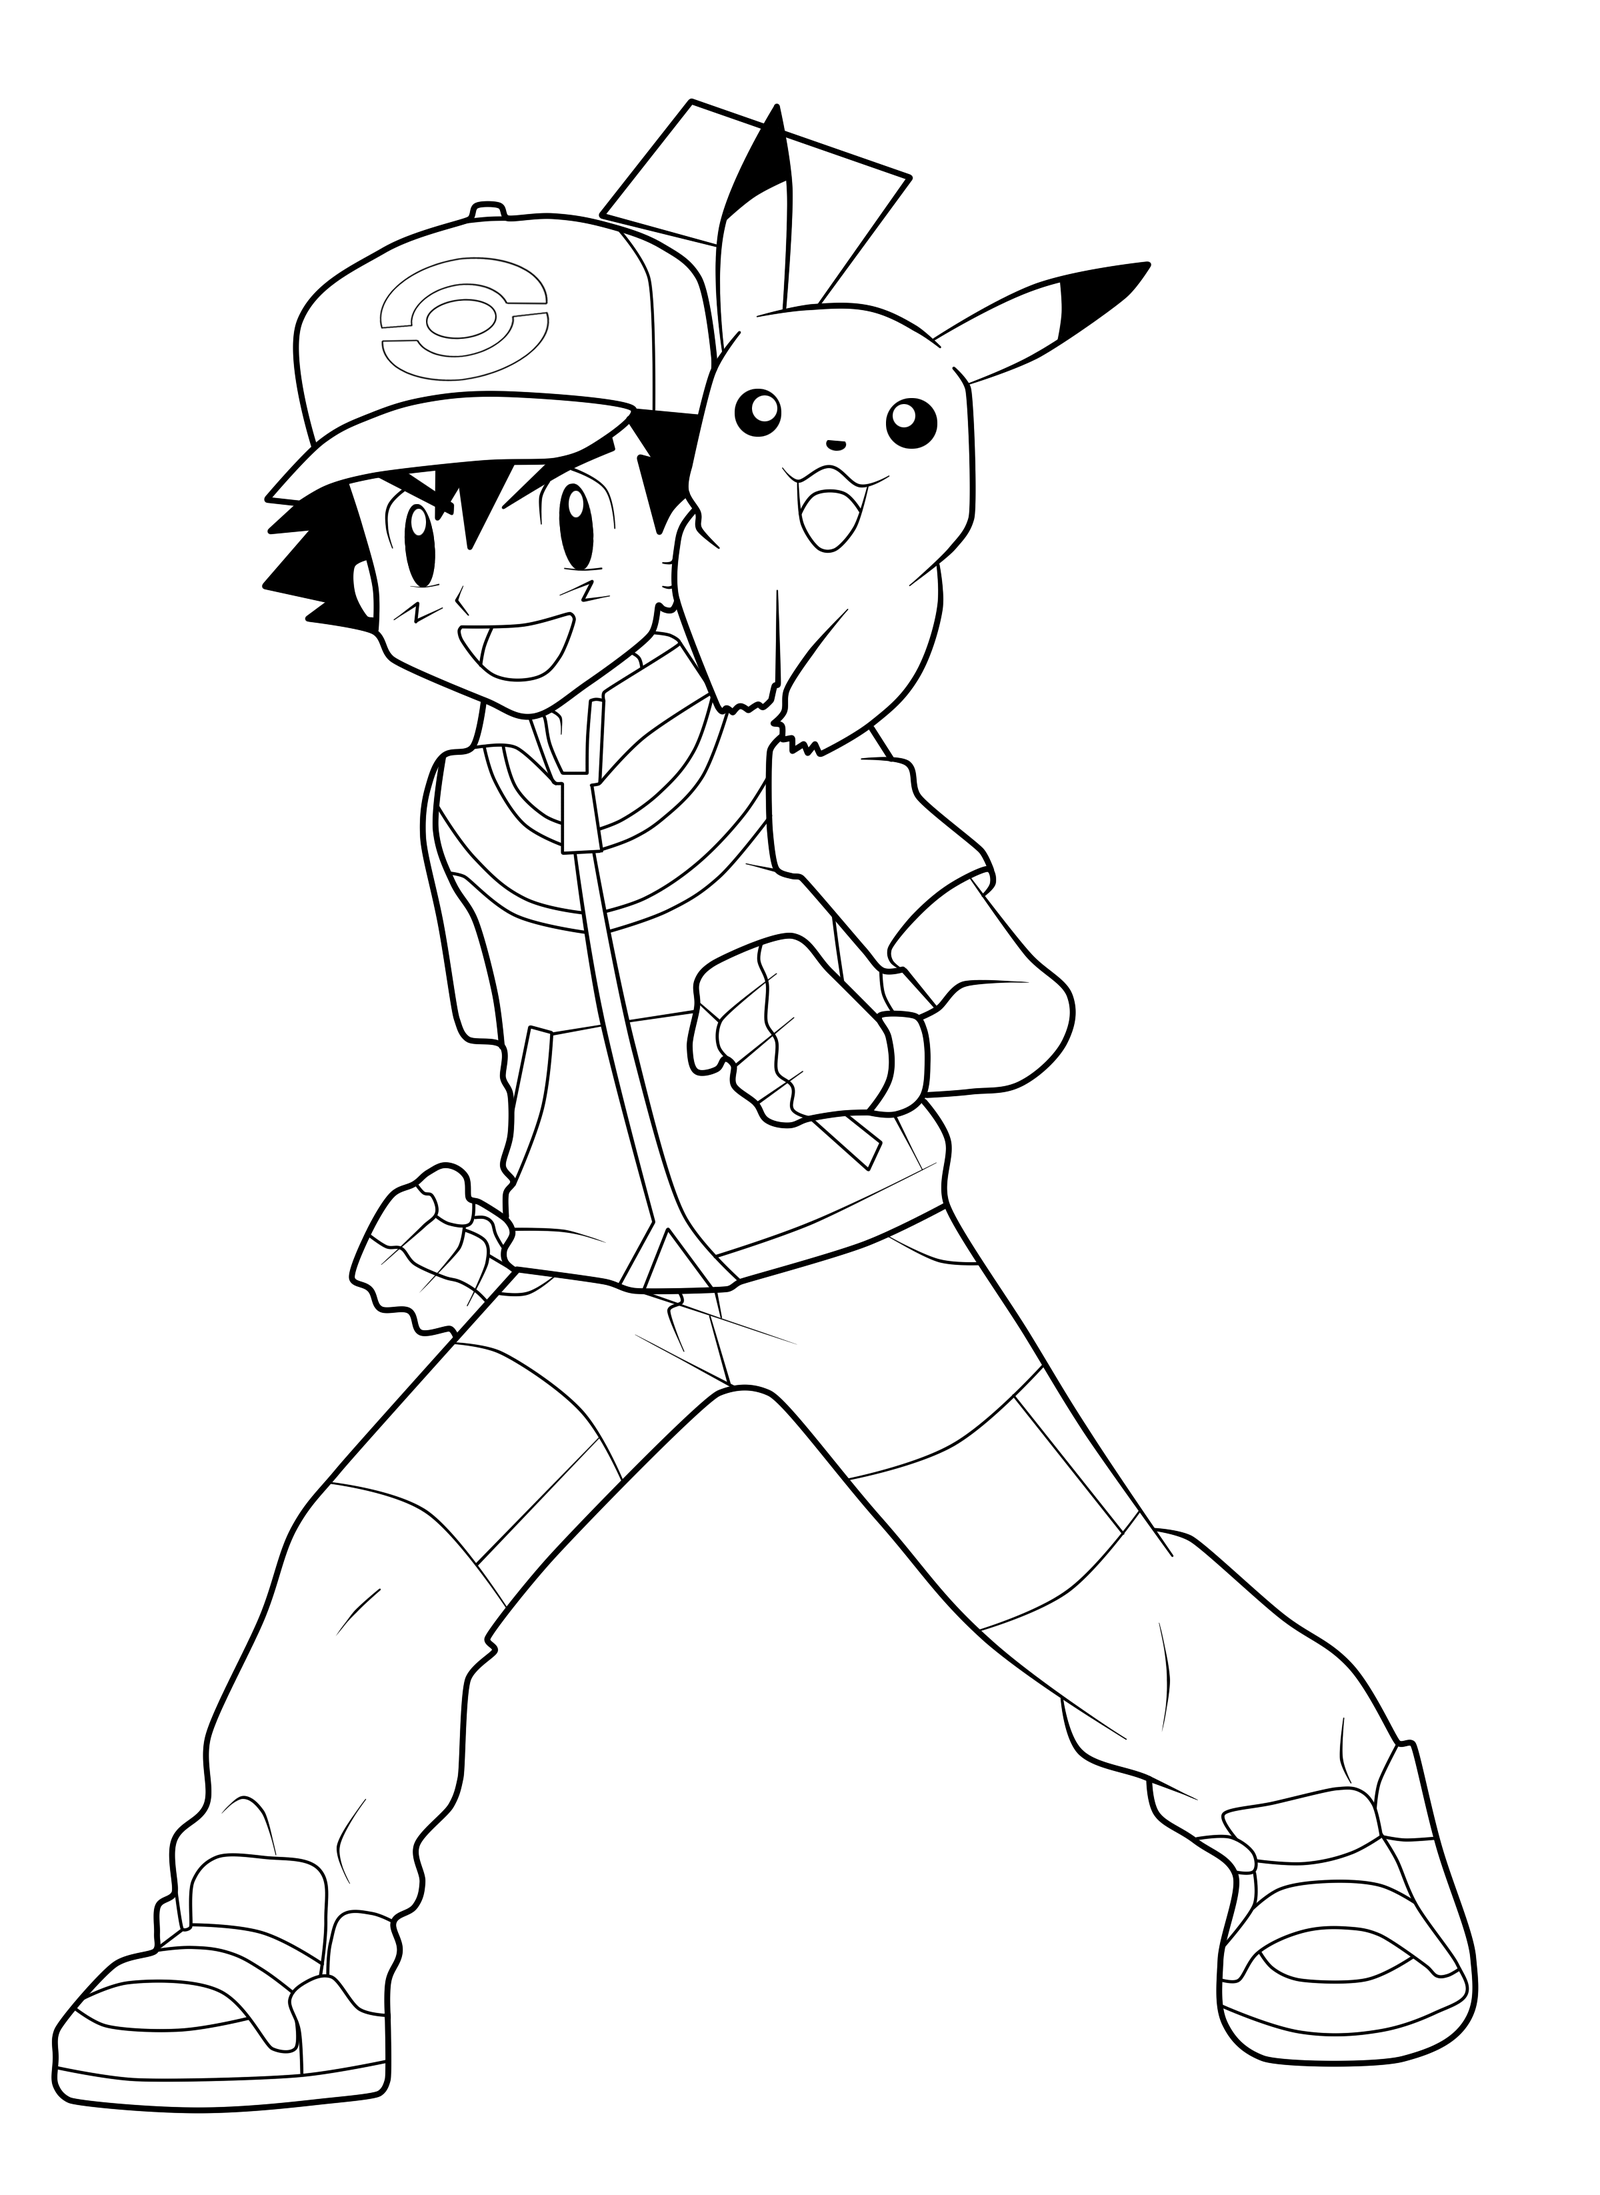 Cute Ash And Pikachu Pages Coloring Pages